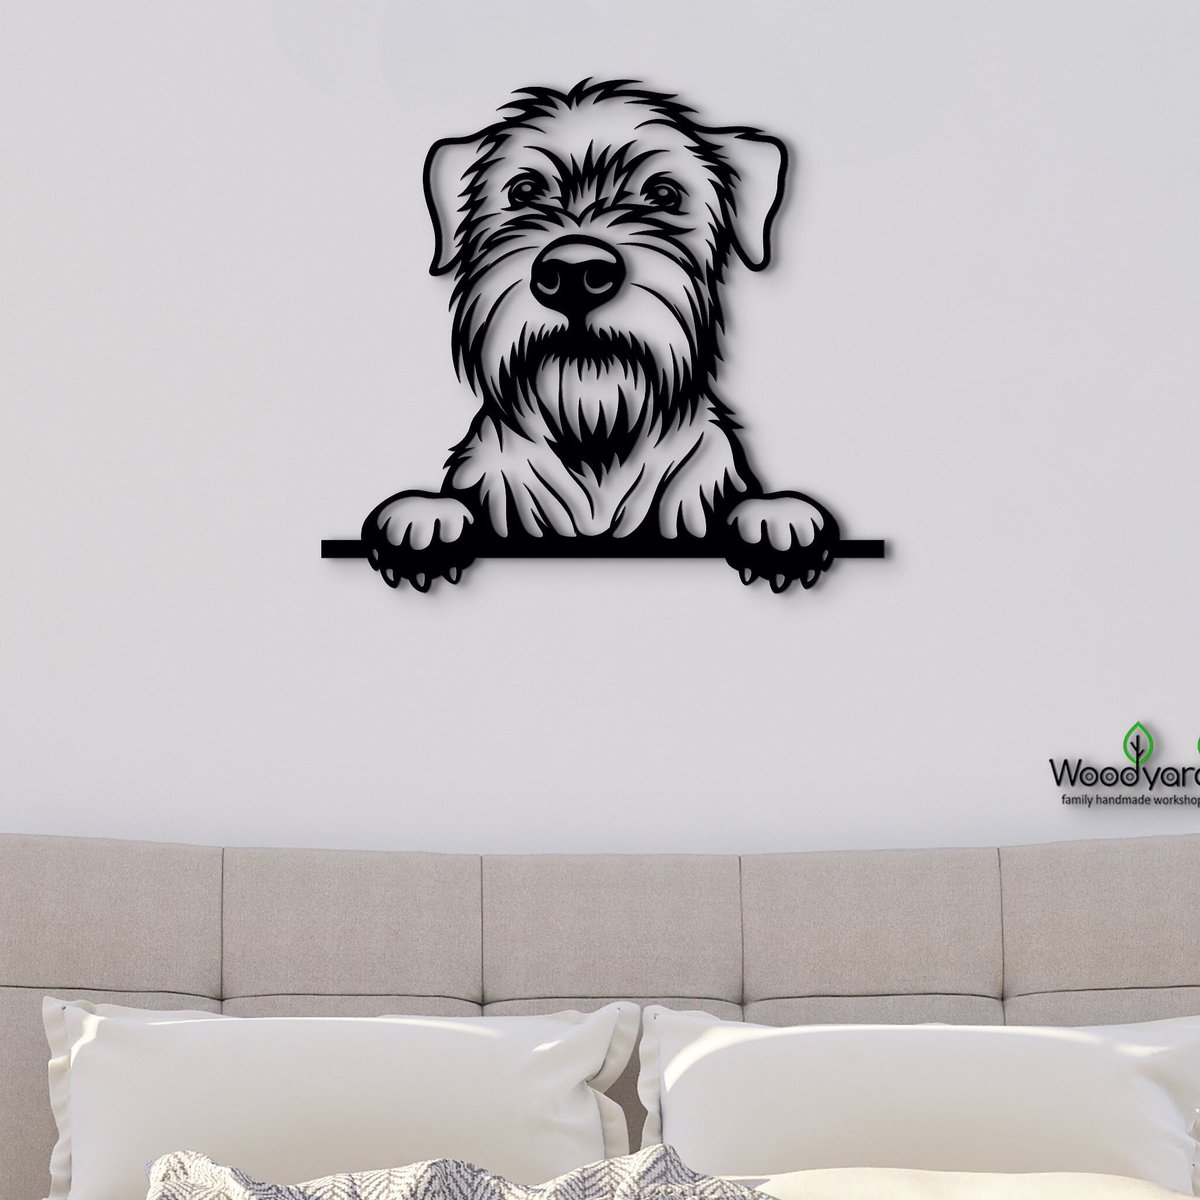 Excited to share the latest addition to my #etsy shop: Custom Soft Coated Wheaten Terrier pet wall sign for home or office. Unique dog themed gift for birthday 
etsy.me/3Z8WJzQ
#dogdormdecor #ornamentfordog #dogbirthdaygift #giftfordogowner #dogsympathygift